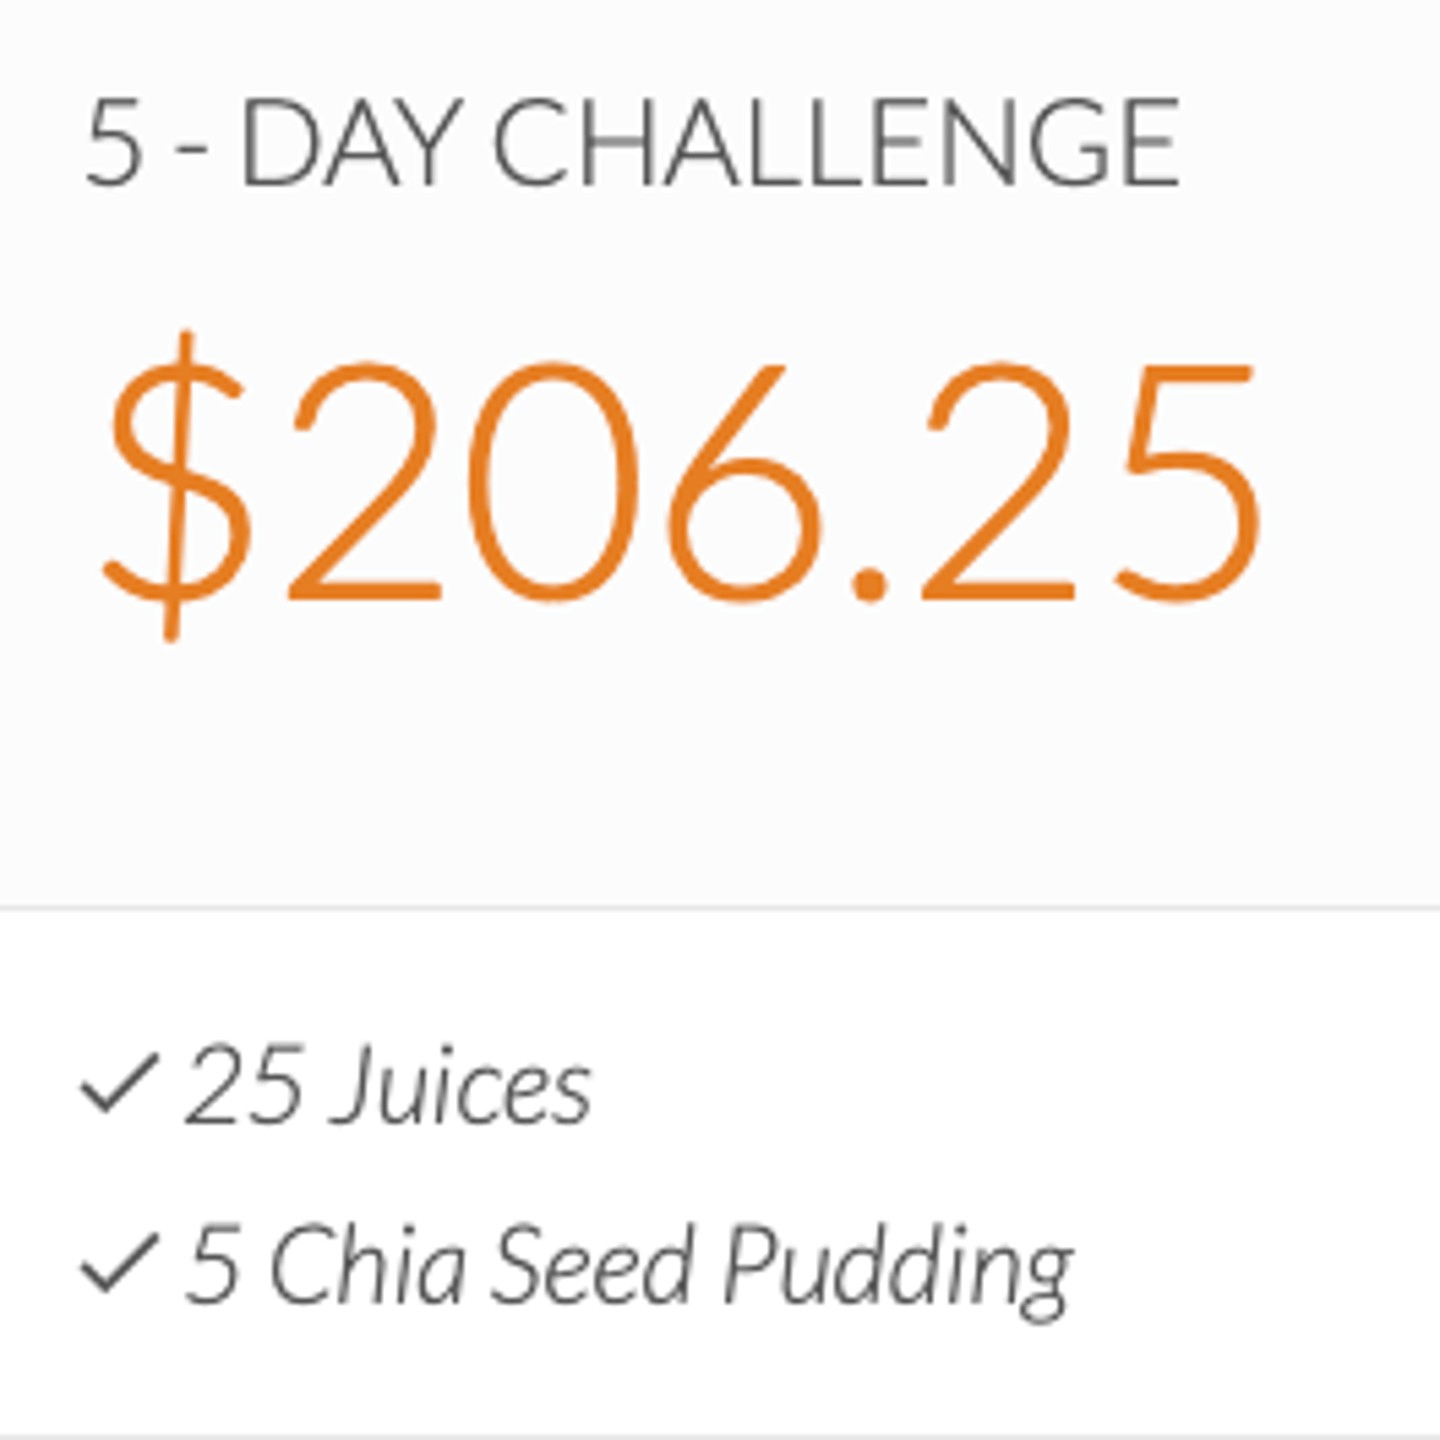 5 Day Challenge Package: